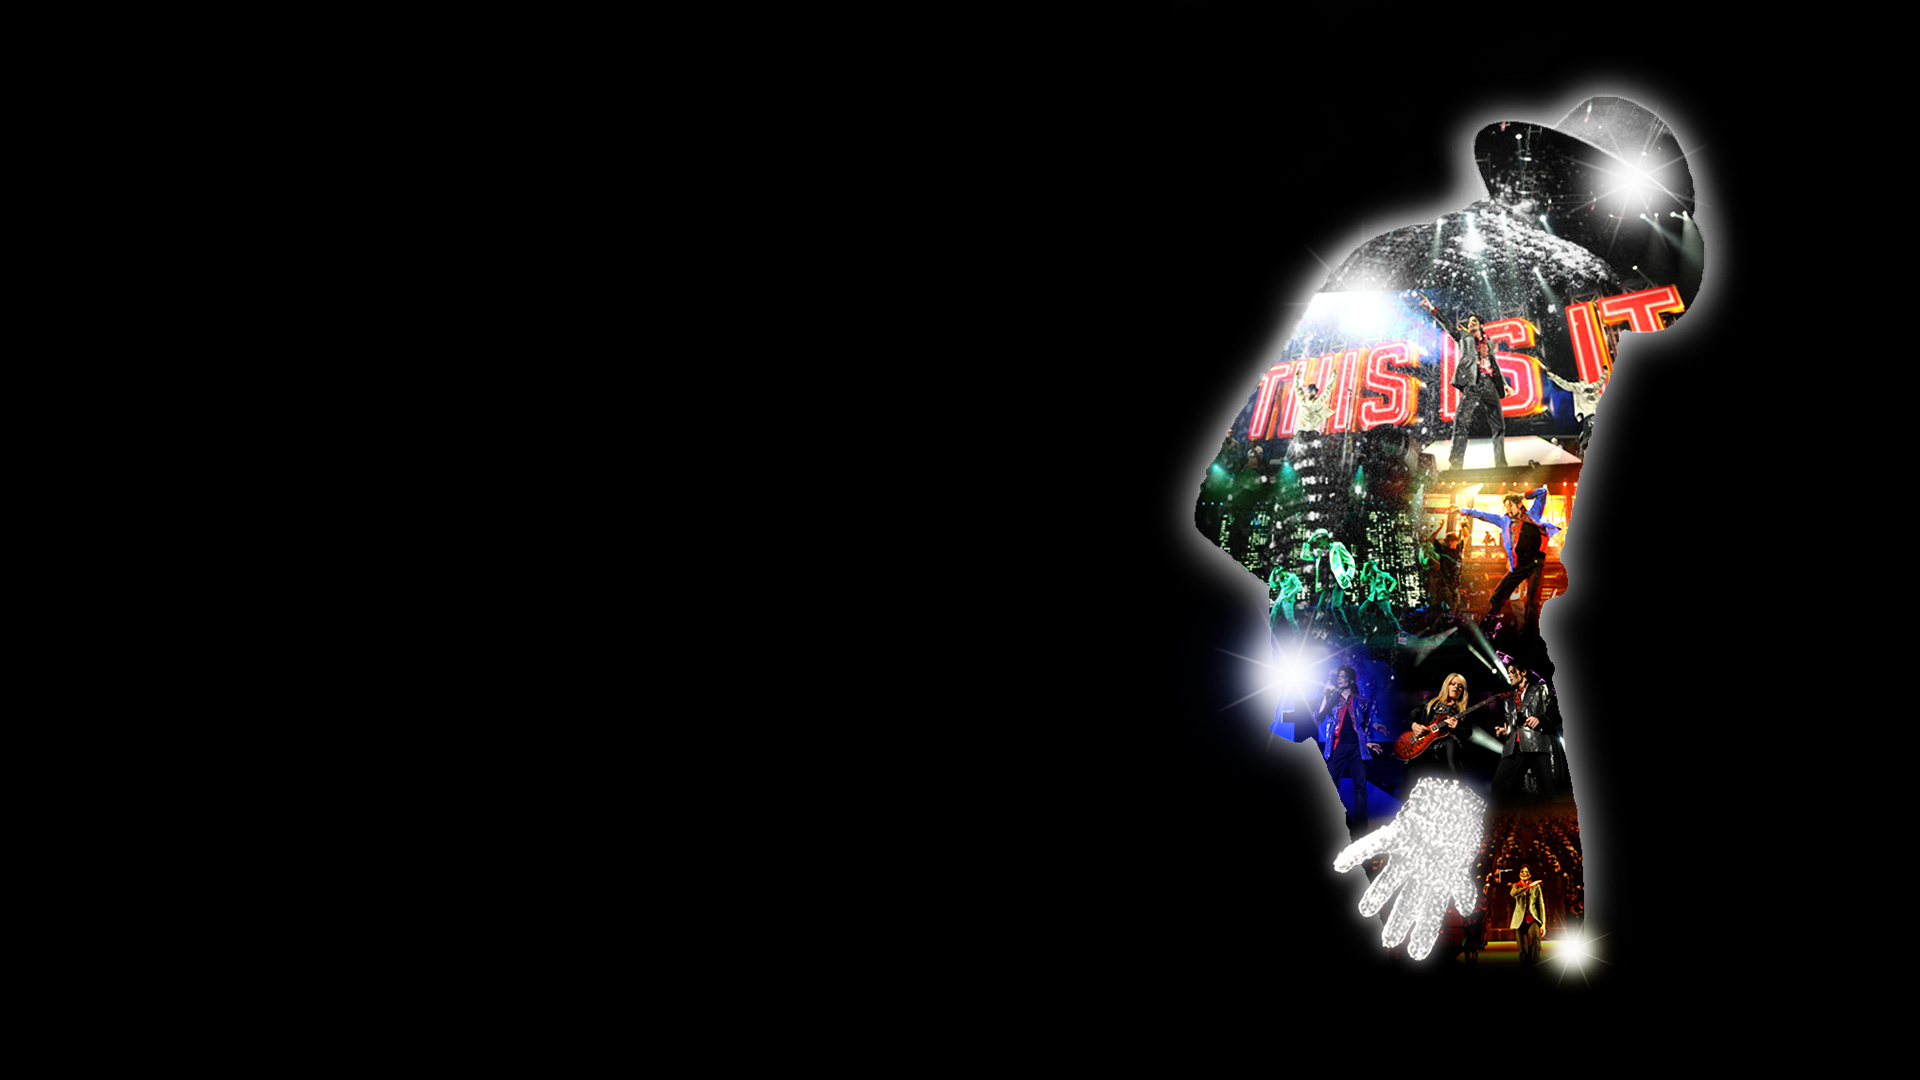 Michael Jackson Background Papers Image Photos